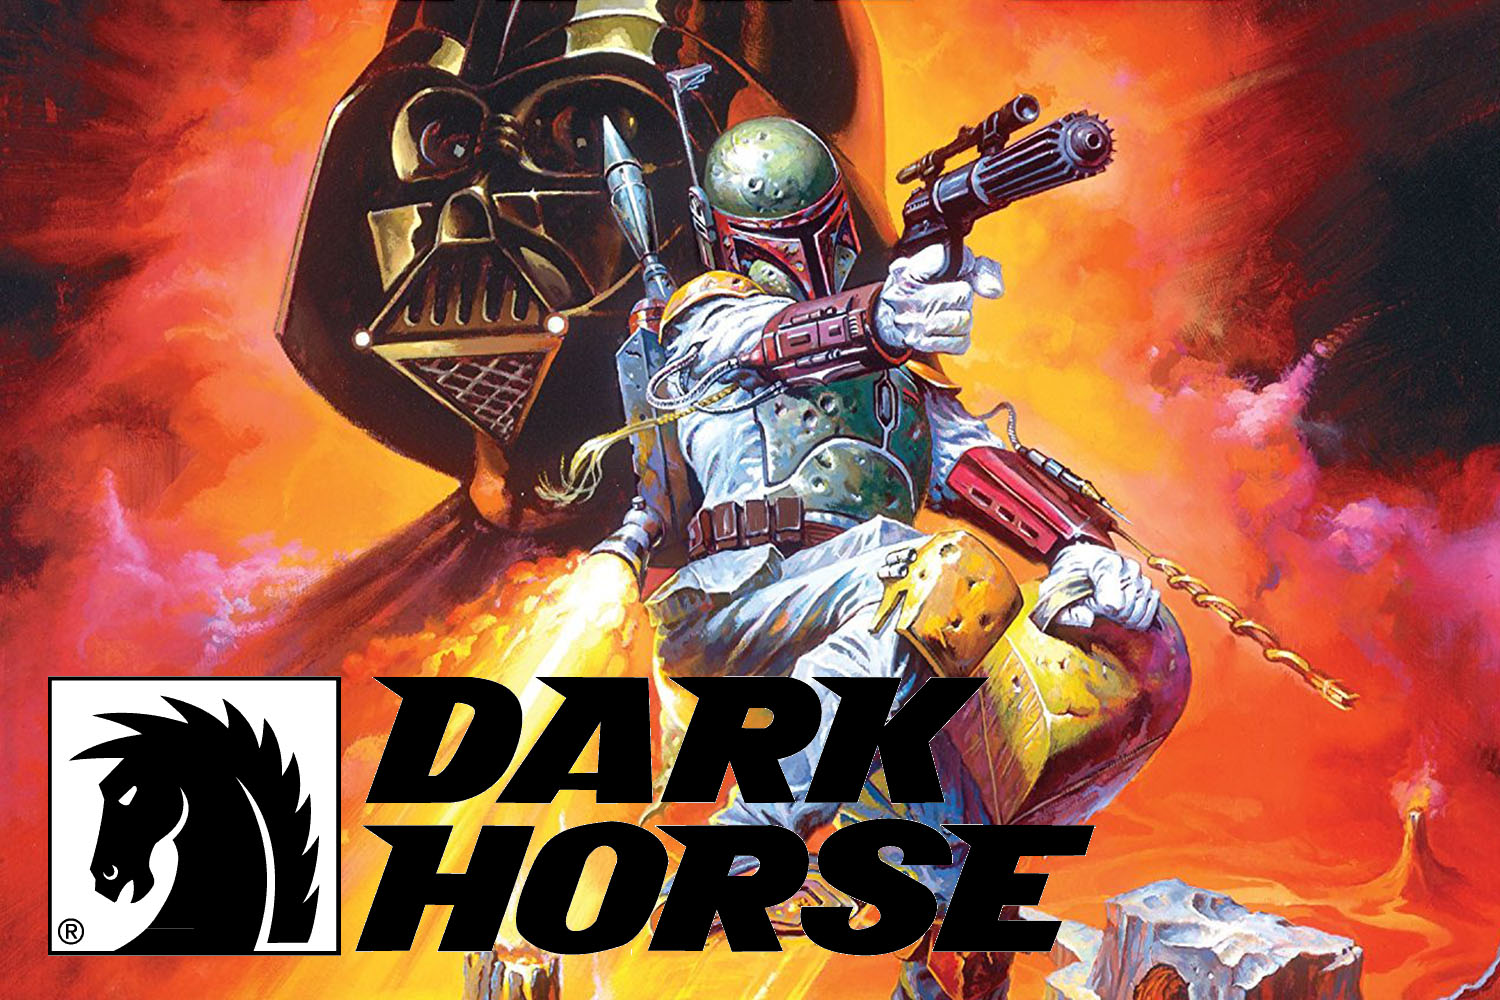 Star Wars returns to Dark Horse Comics with all-ages comics in 2022